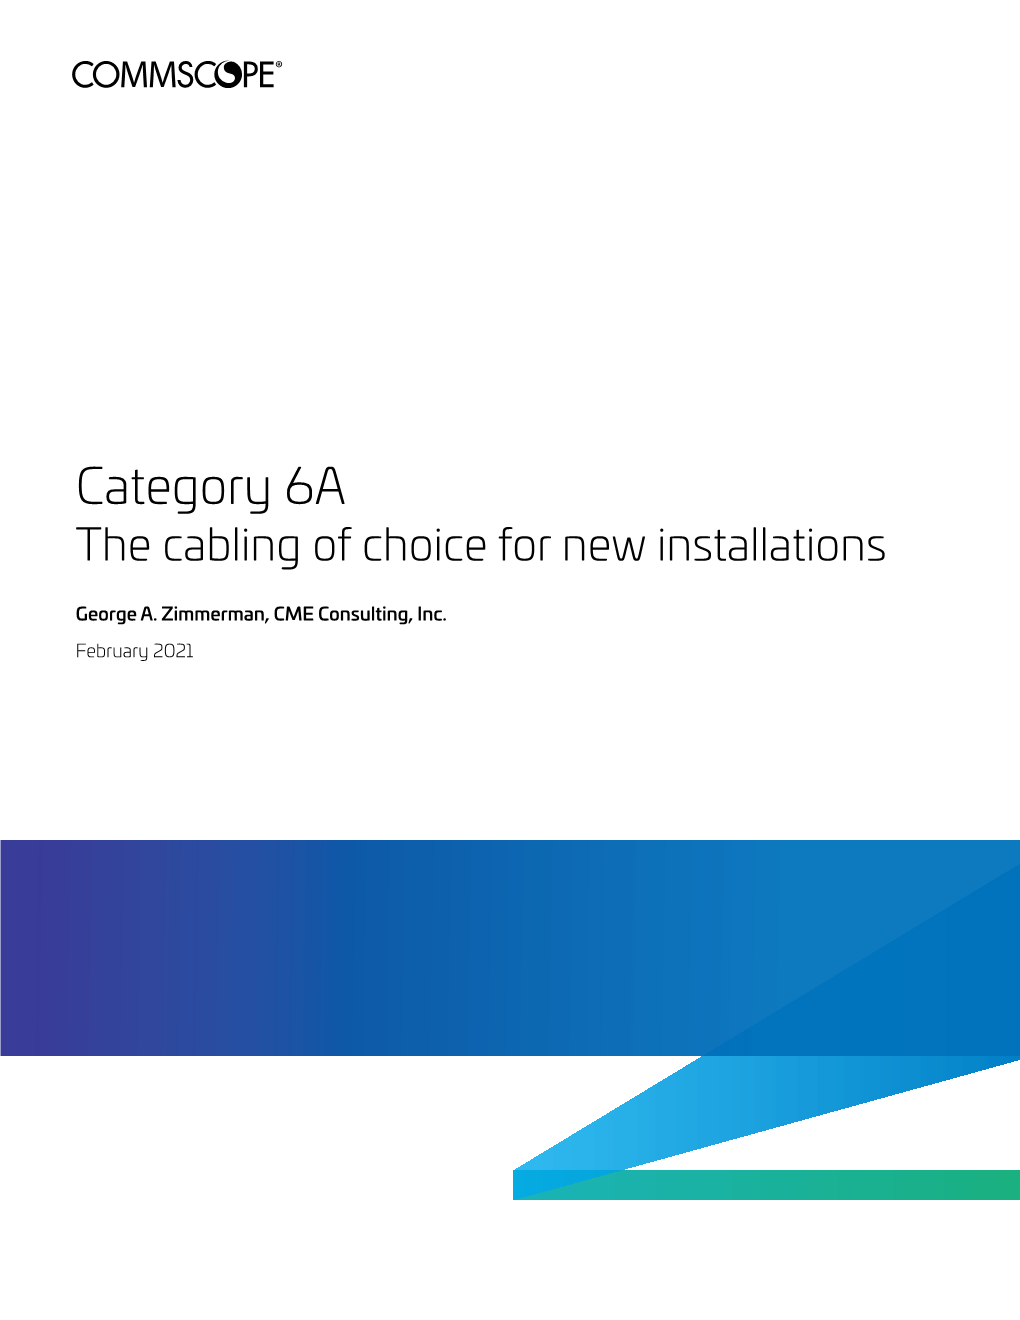 Category 6A the Cabling of Choice for New Installations